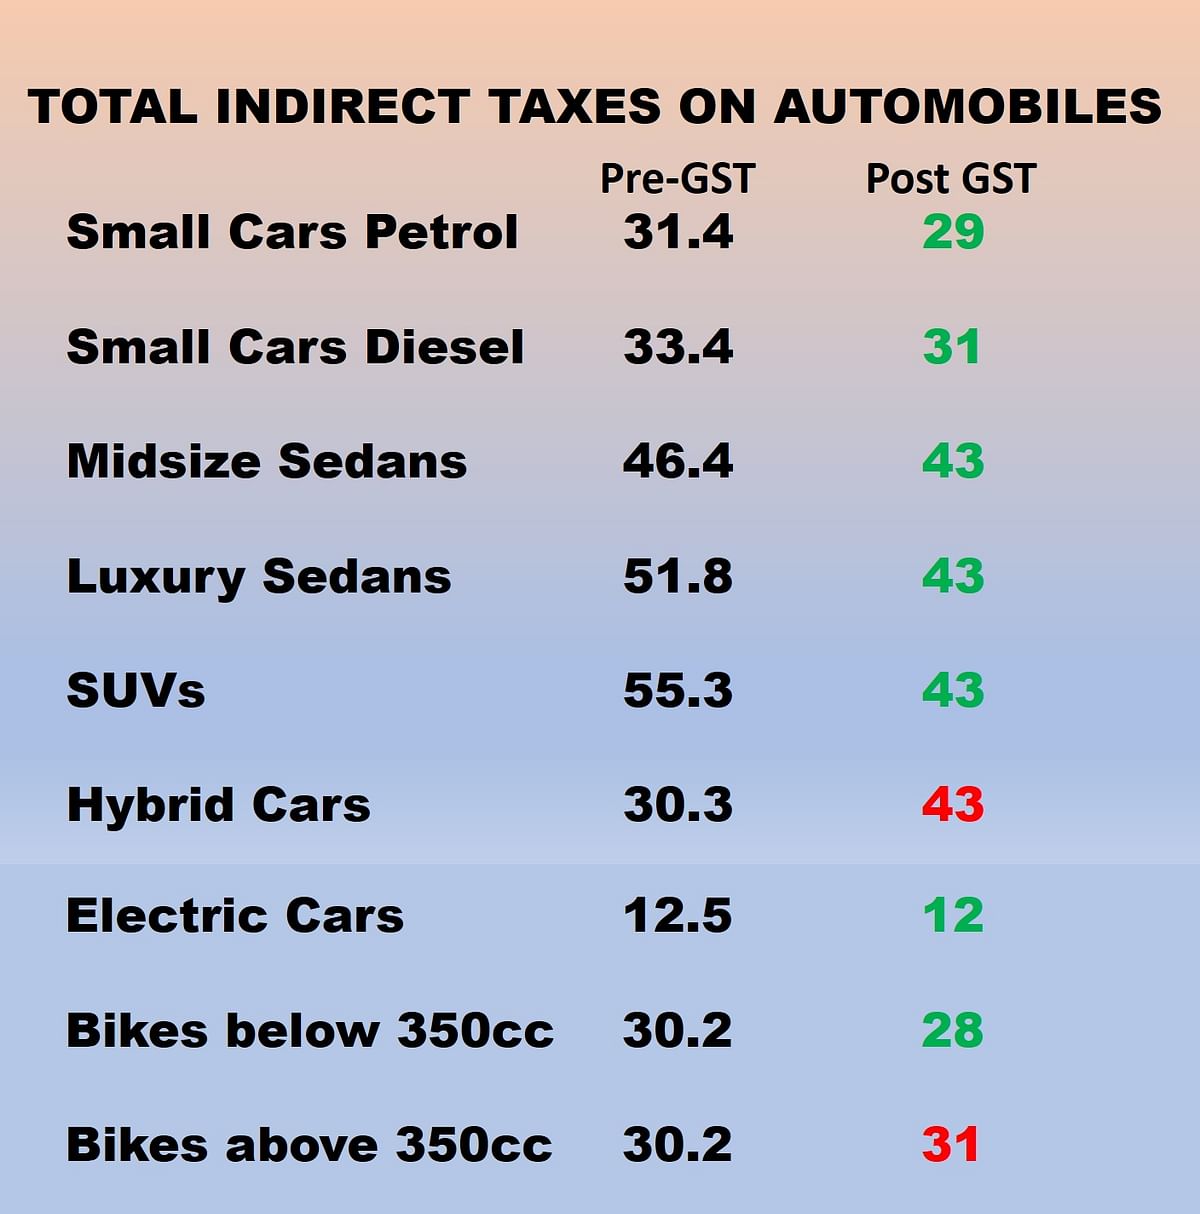 Most cars and bikes are seeing a significant reduction in ex-showroom prices after GST has kicked in.